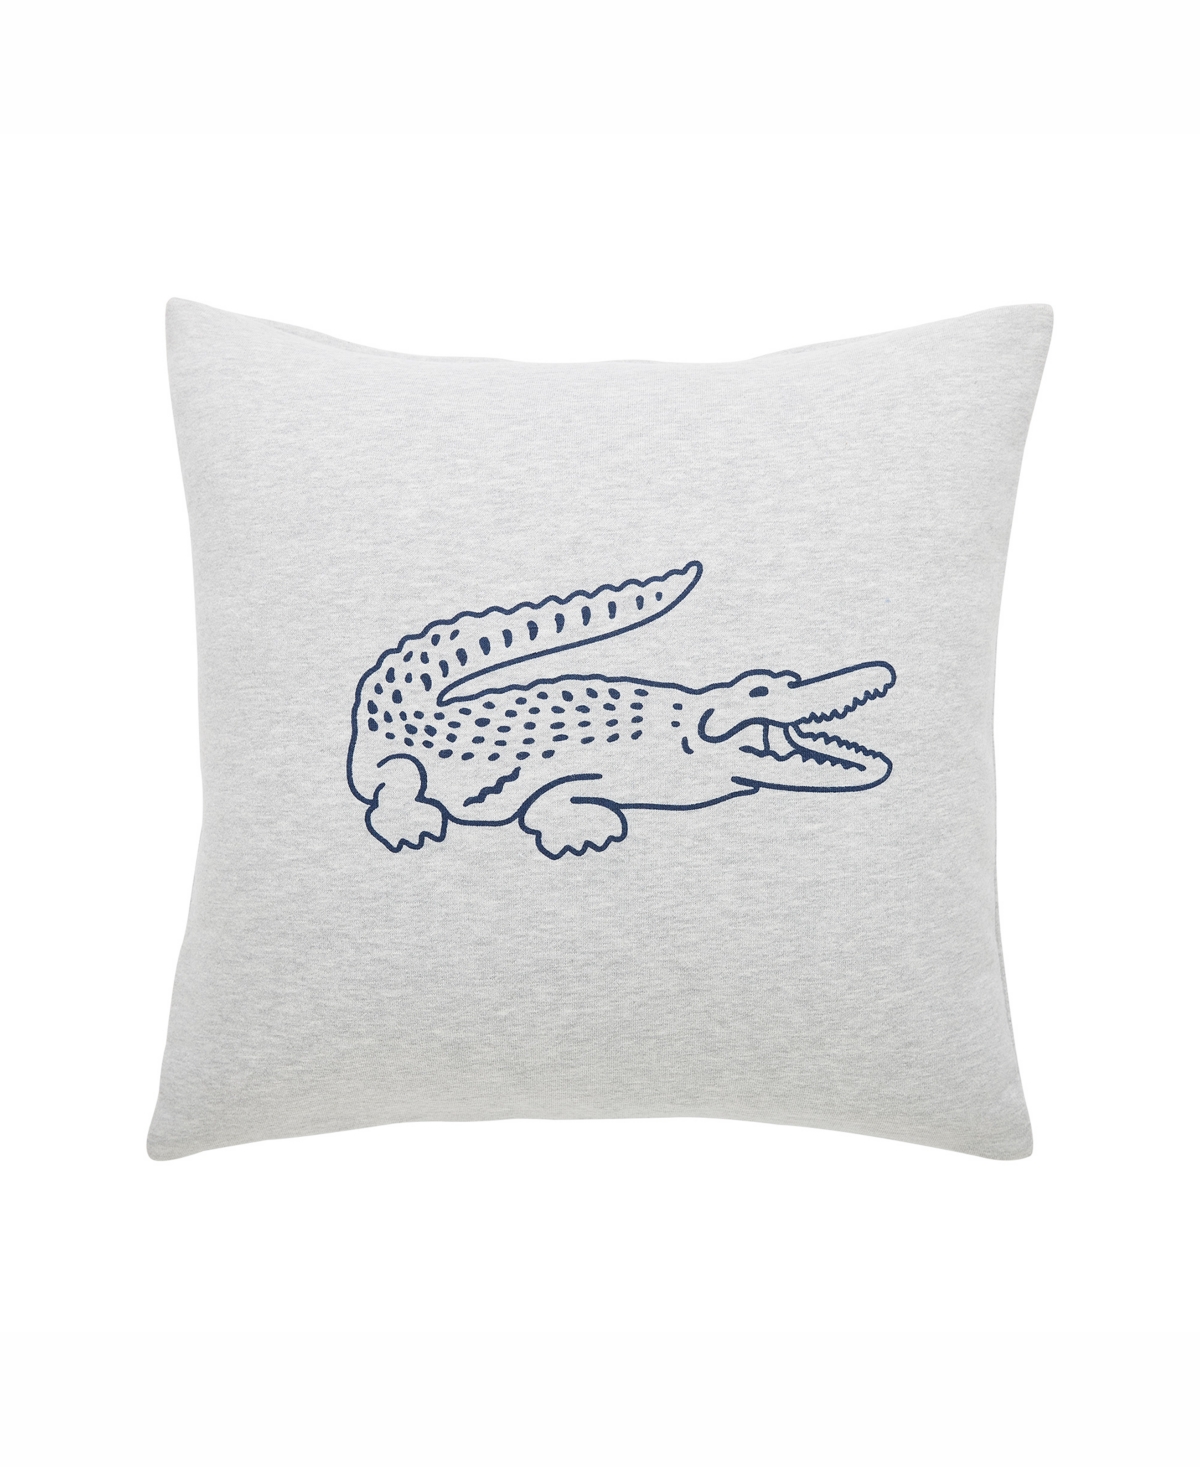 Lacoste Home Vintage-like Croc Decorative Pillow Bedding In Gray